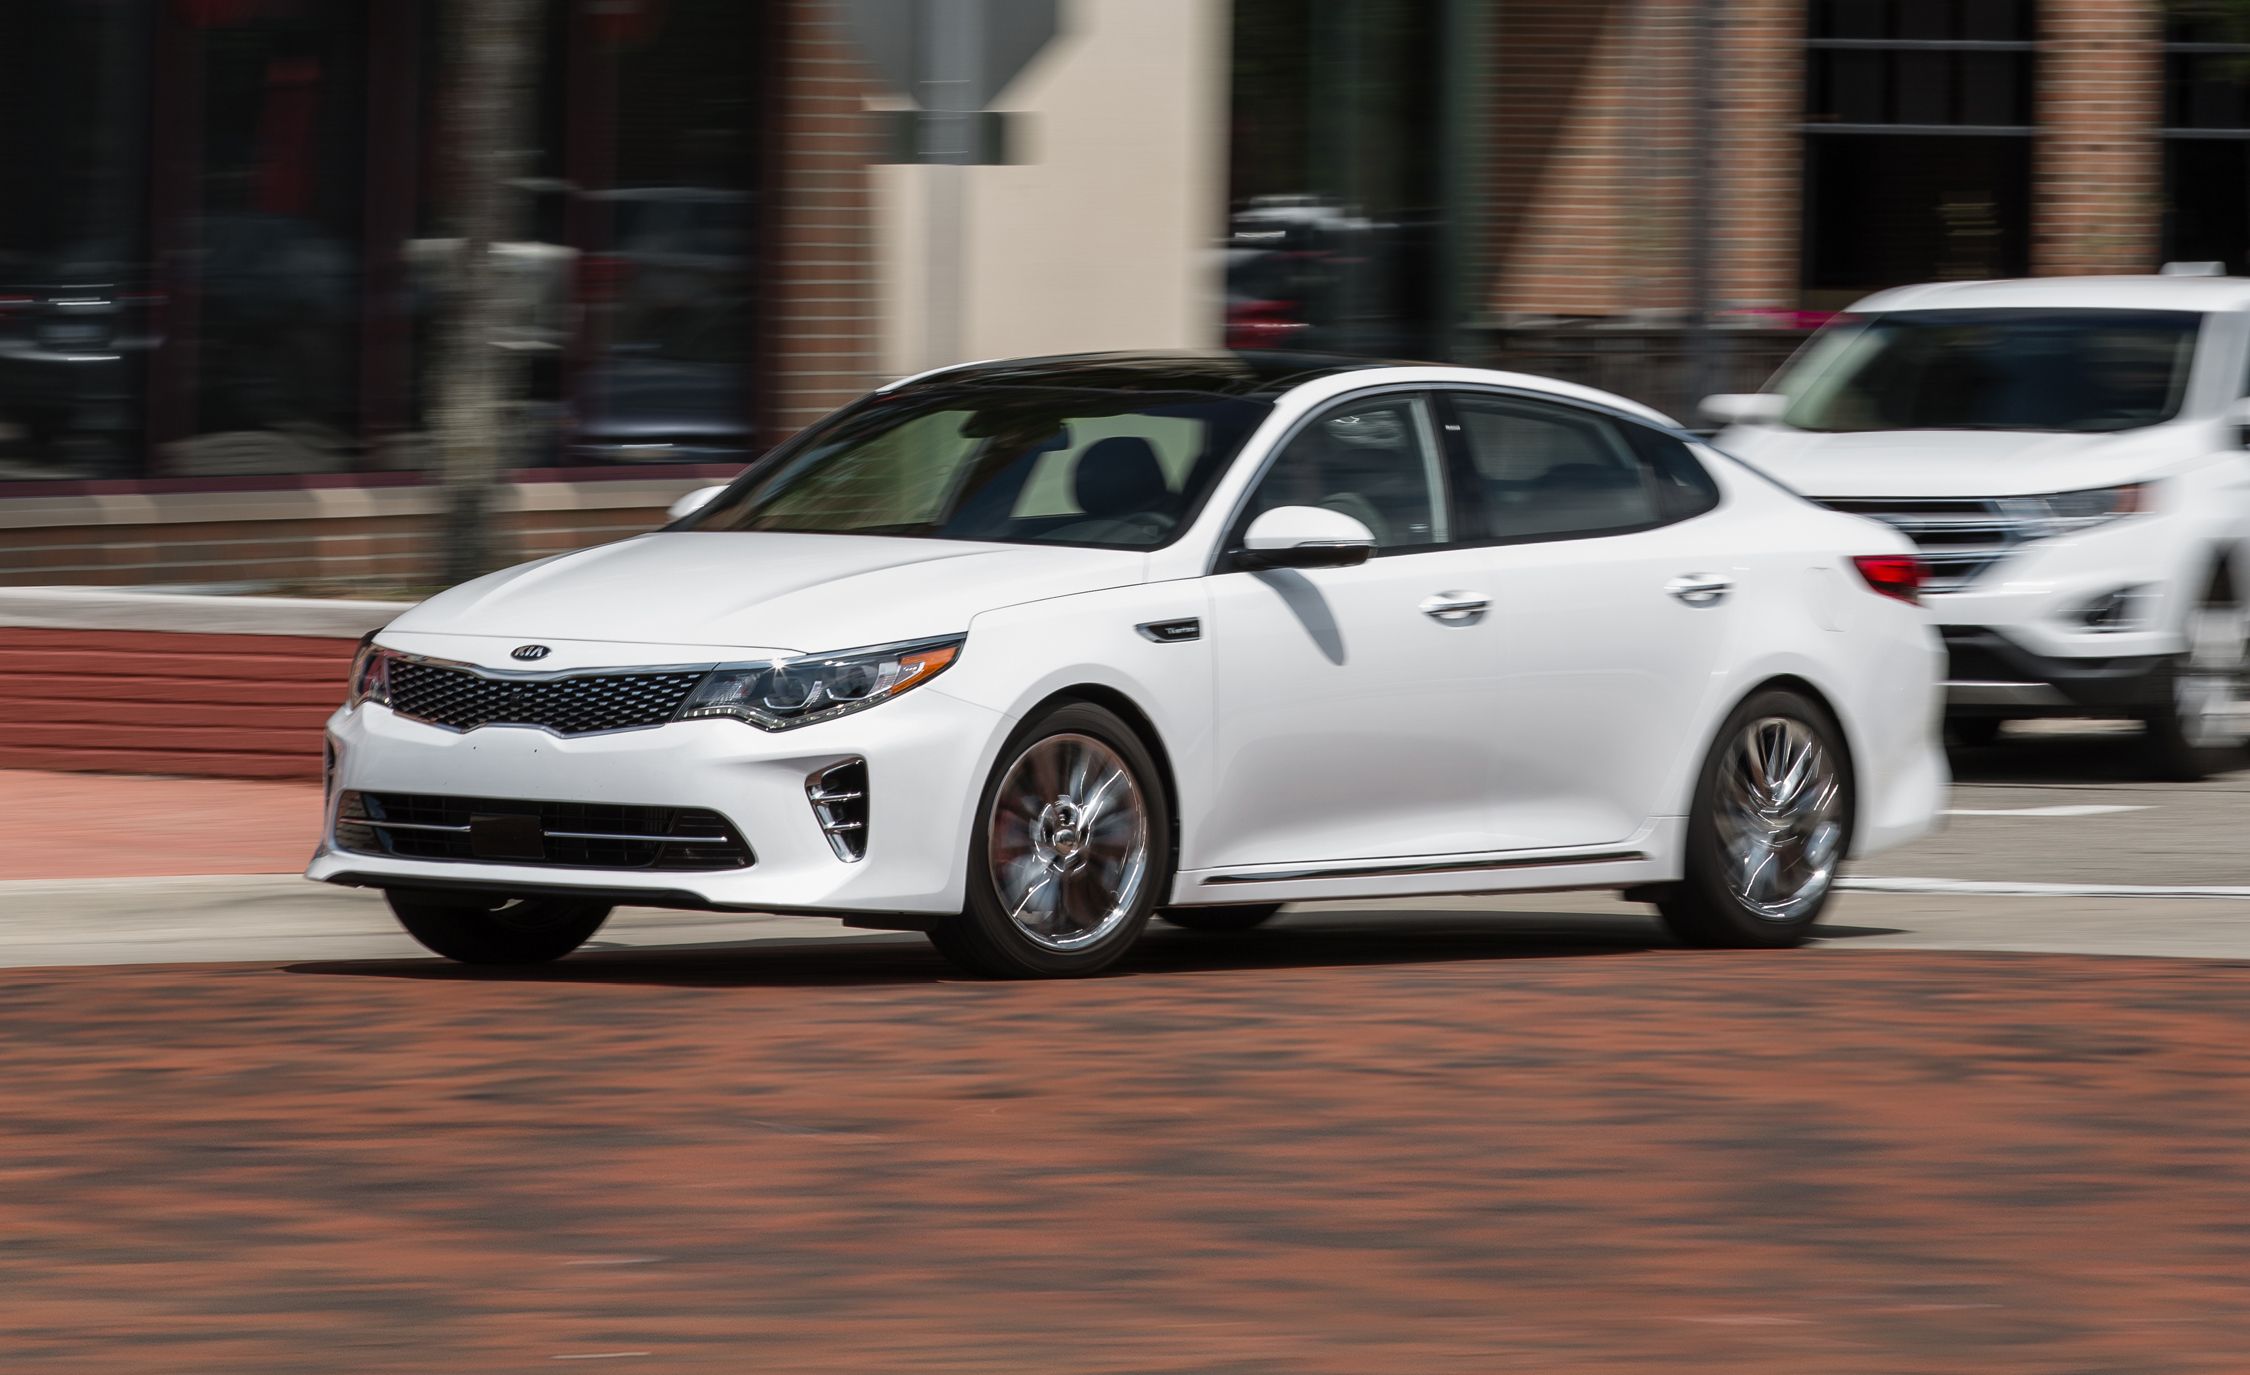 2017 Kia Optima Review, Pricing, and Specs